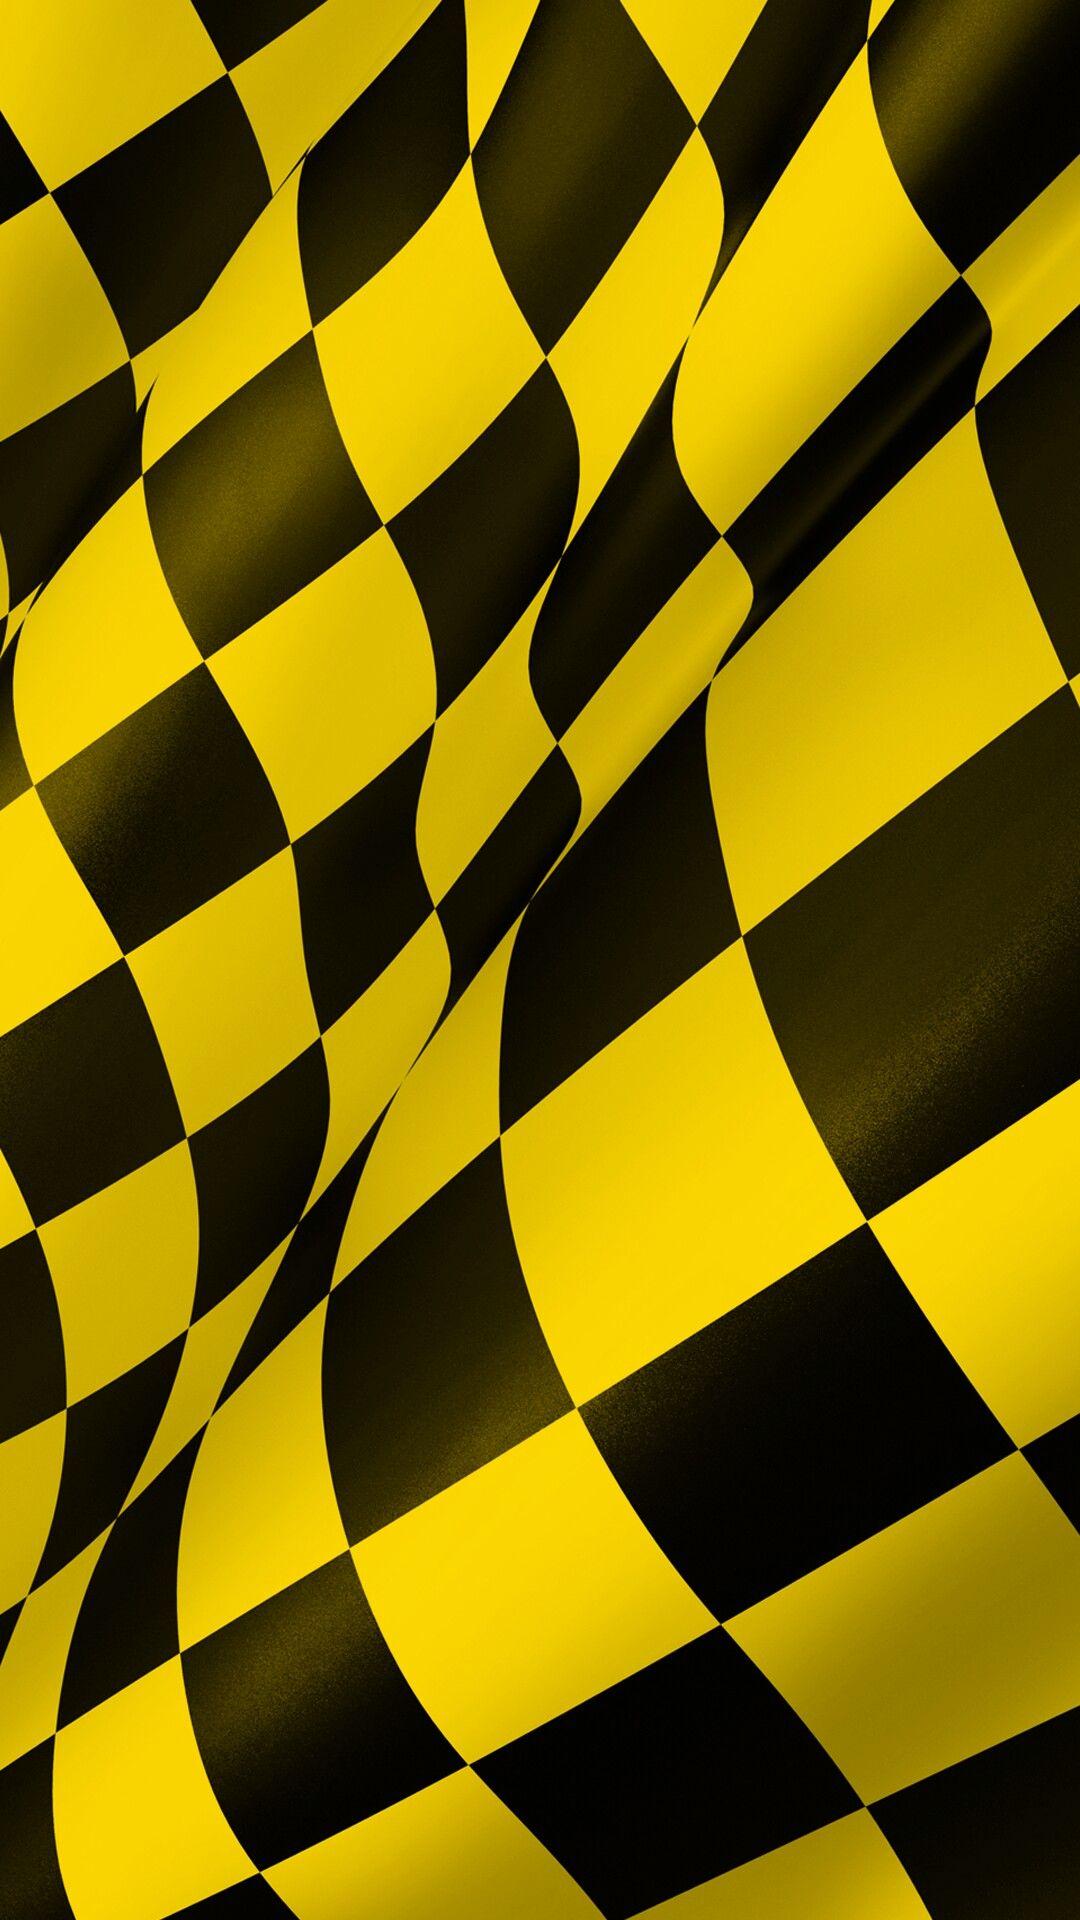 Checkered Flag Vector Images over 13000